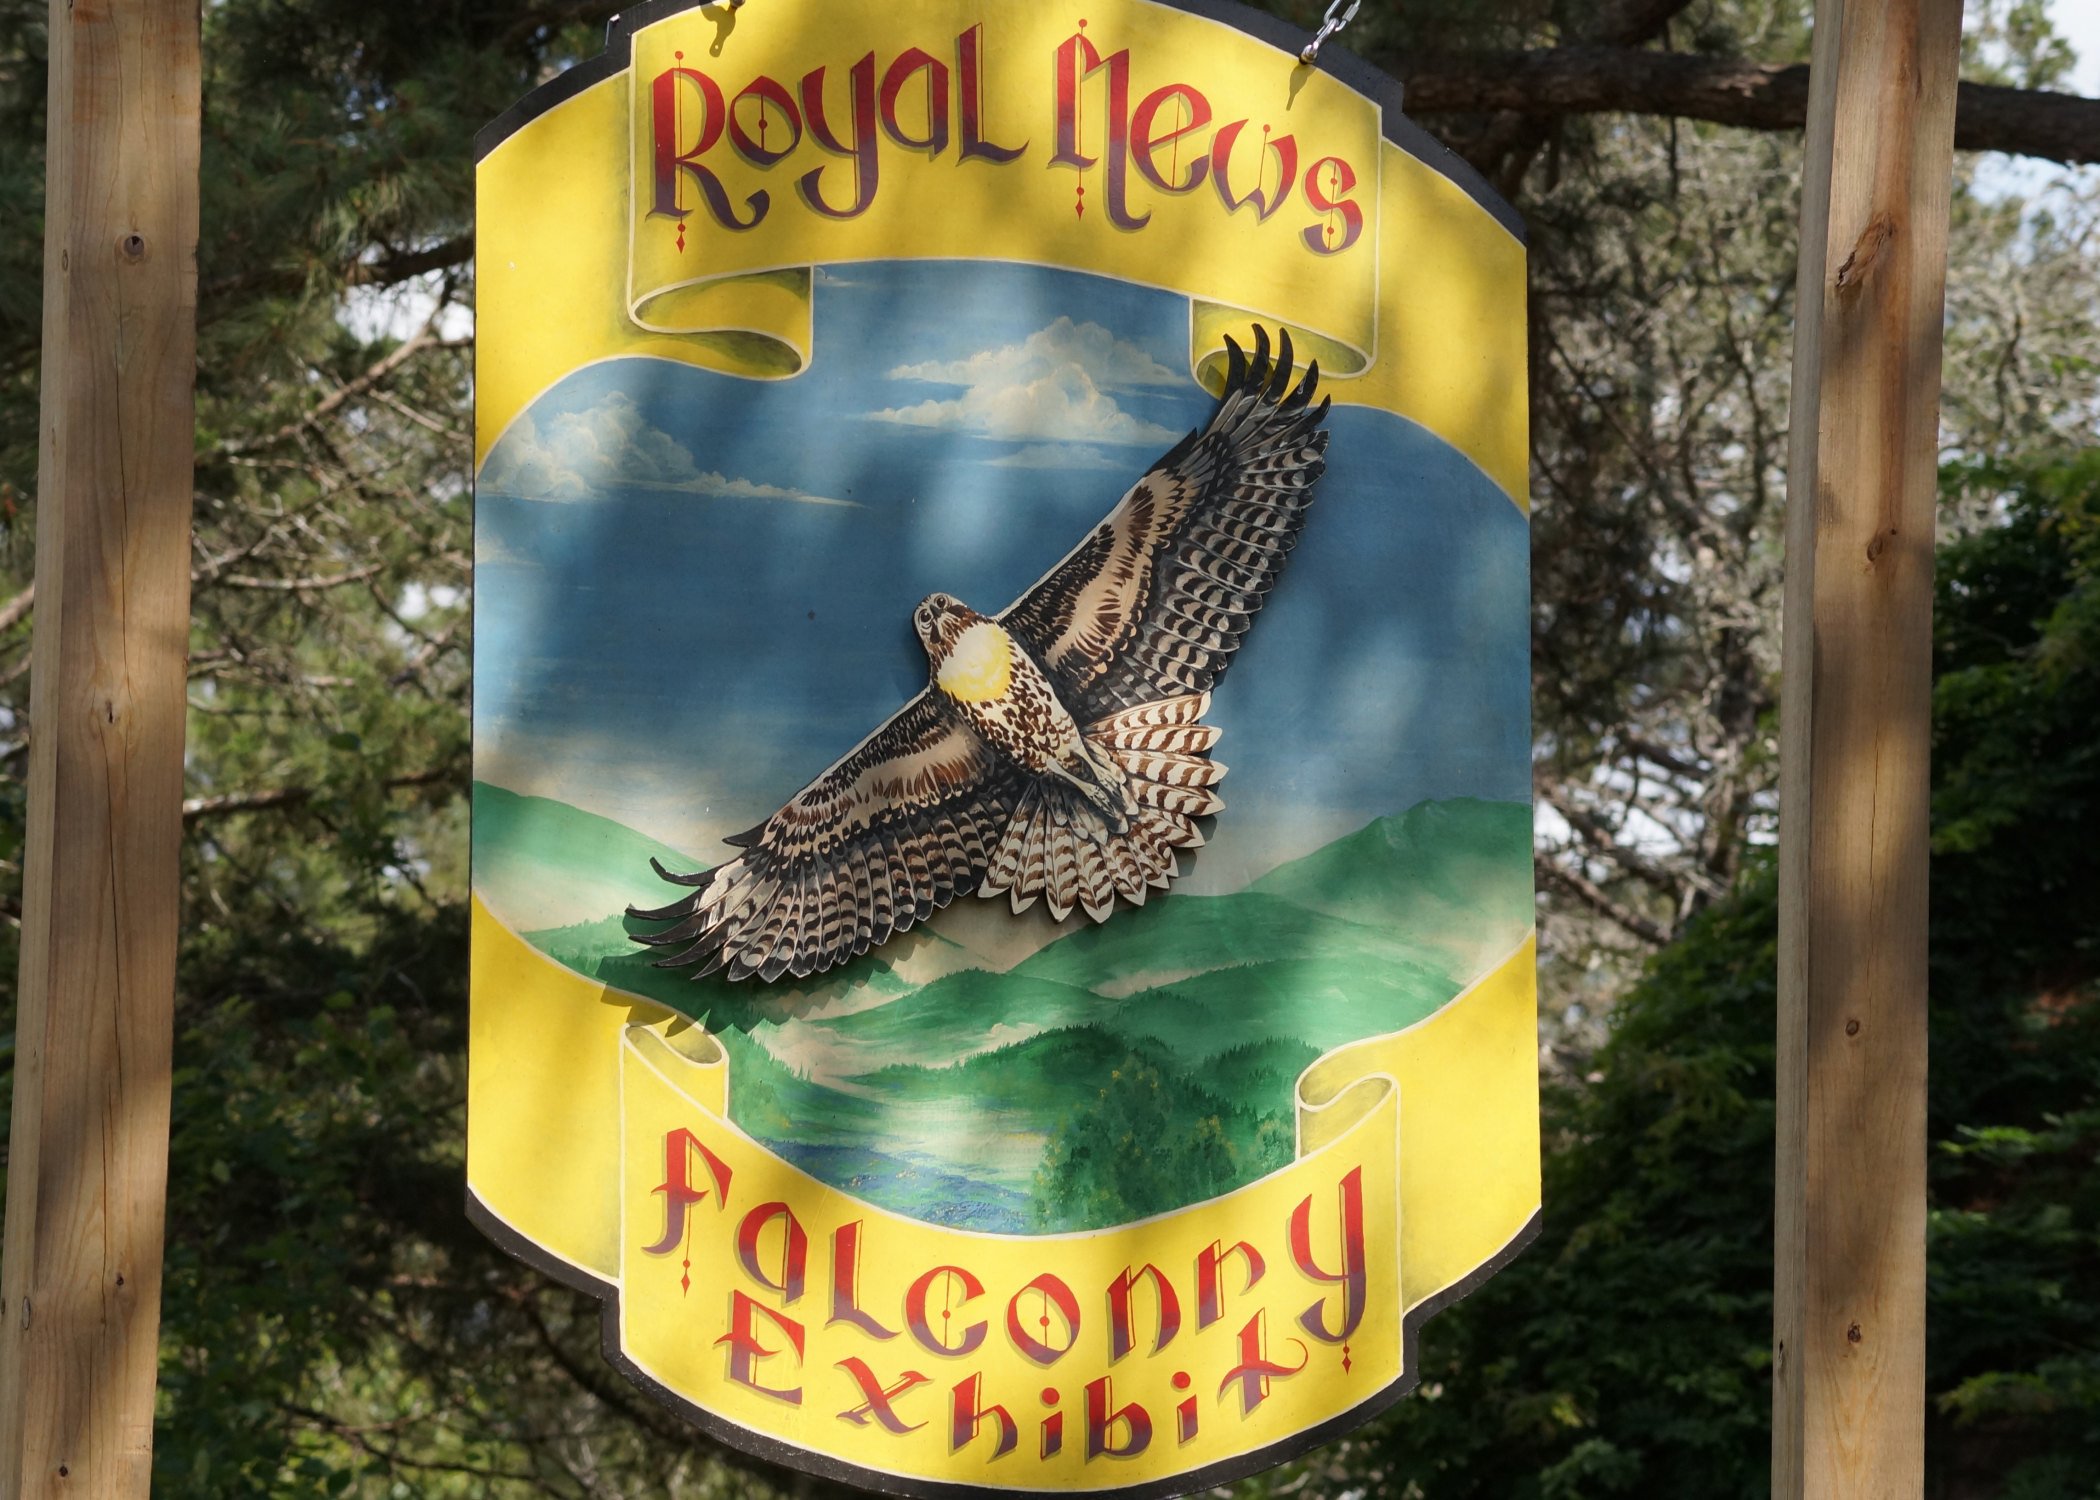 Falconry exhibit sign